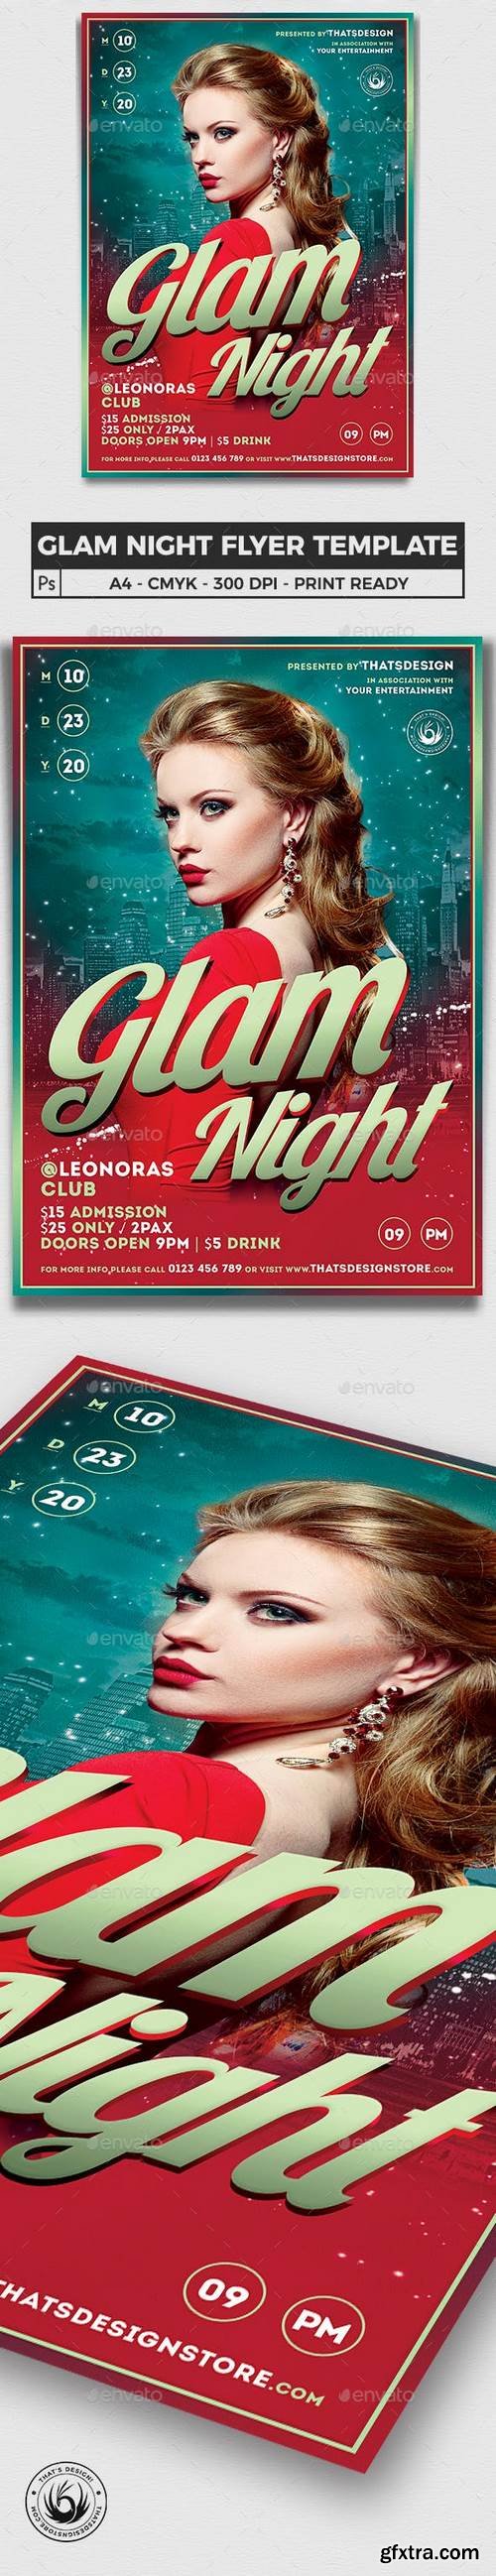 Graphicriver - Glam Night Flyer Template 15696722